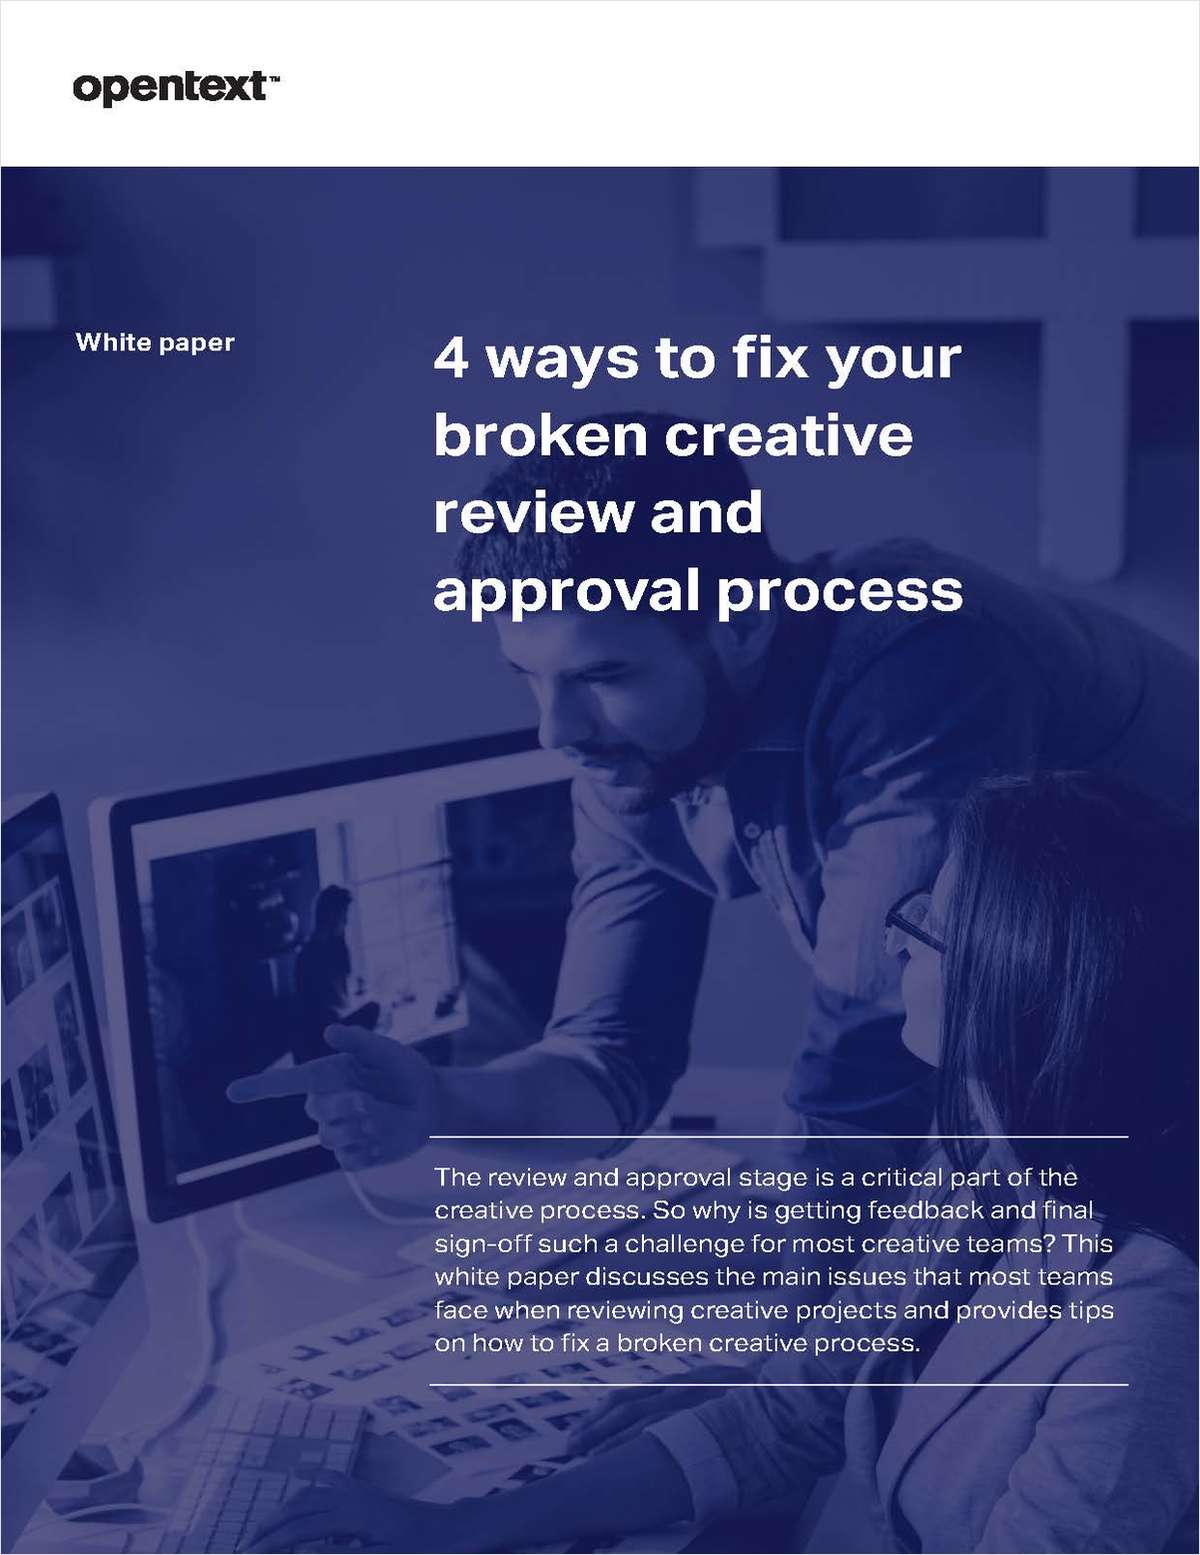 4 ways to fix your broken creative review and approval process